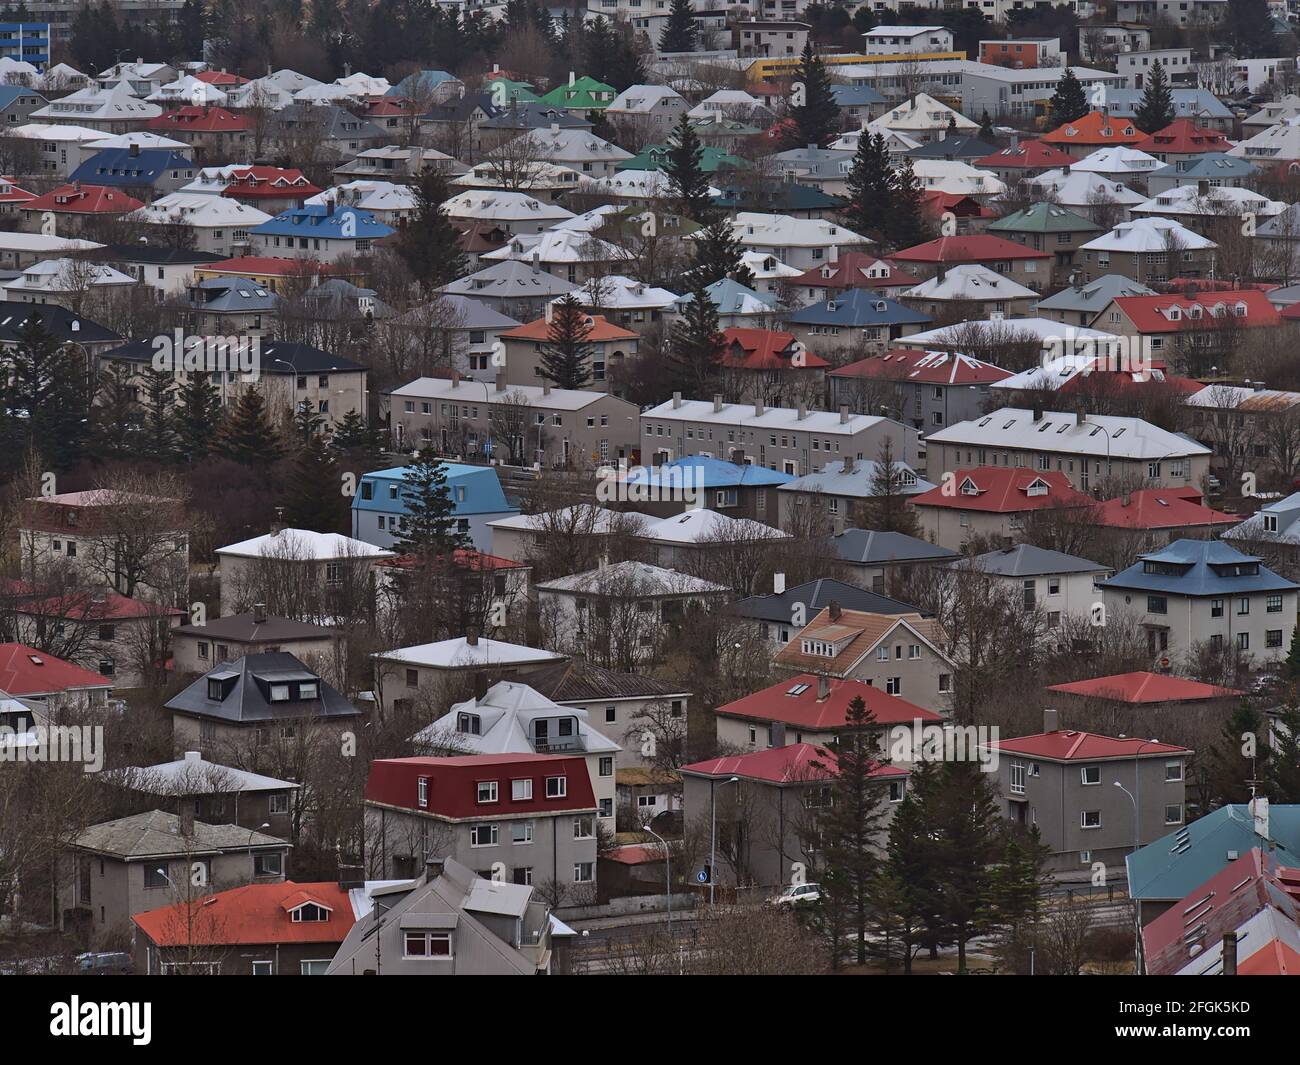 Beautiful aerial view of residential area in Reykjavík, capital of Iceland, with buildings, colorful rooftops and trees in between on cloudy day. Stock Photo